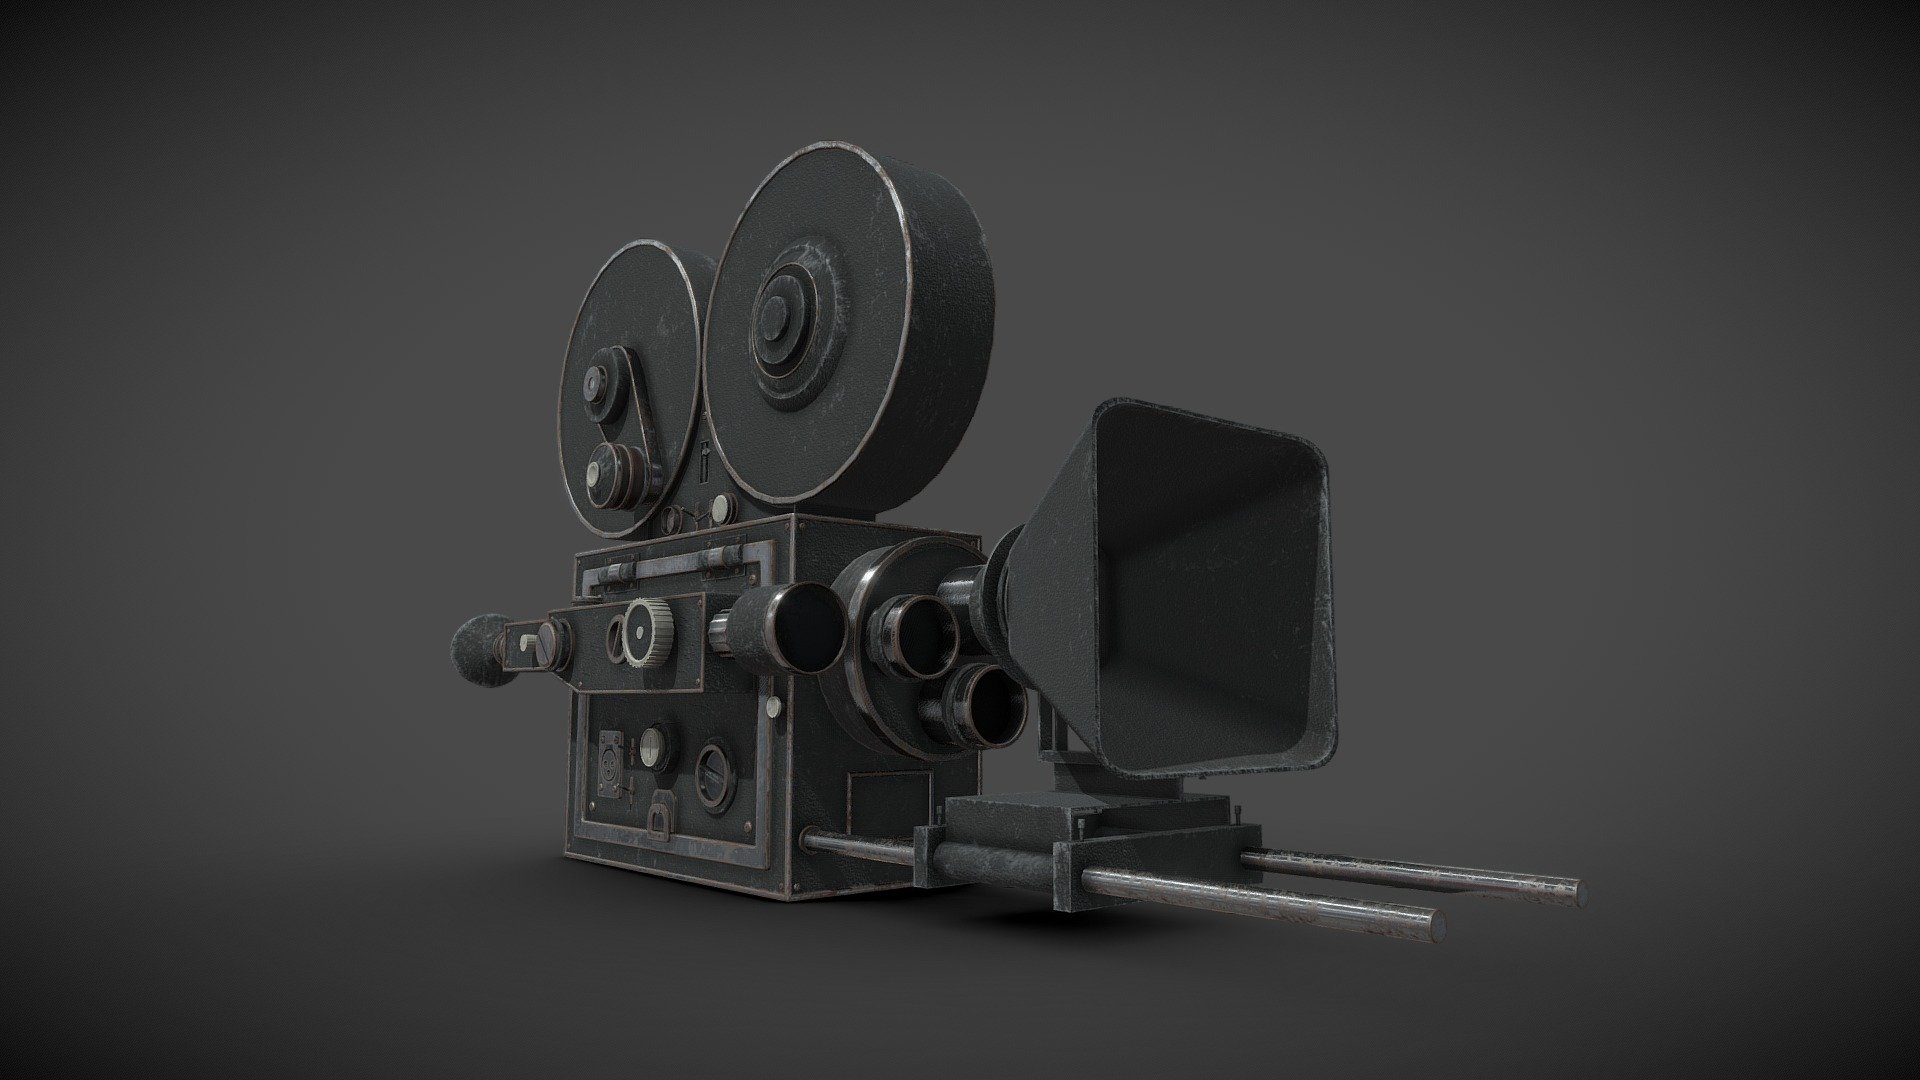 Model of a 1930's Movie Camera.
Modelled in Blender.
Textured and baked in Substance Painter.
Set to accurate scale.
Ready for use in a game/animation scene.
Adjustable crank handle and lenses.
4K PBR textures (AO, Base, Metallic, Normal, Roughness).

Artstation - 1930's Movie Camera - Buy Royalty Free 3D model by Daz (@Darren.Hogan) 3d model